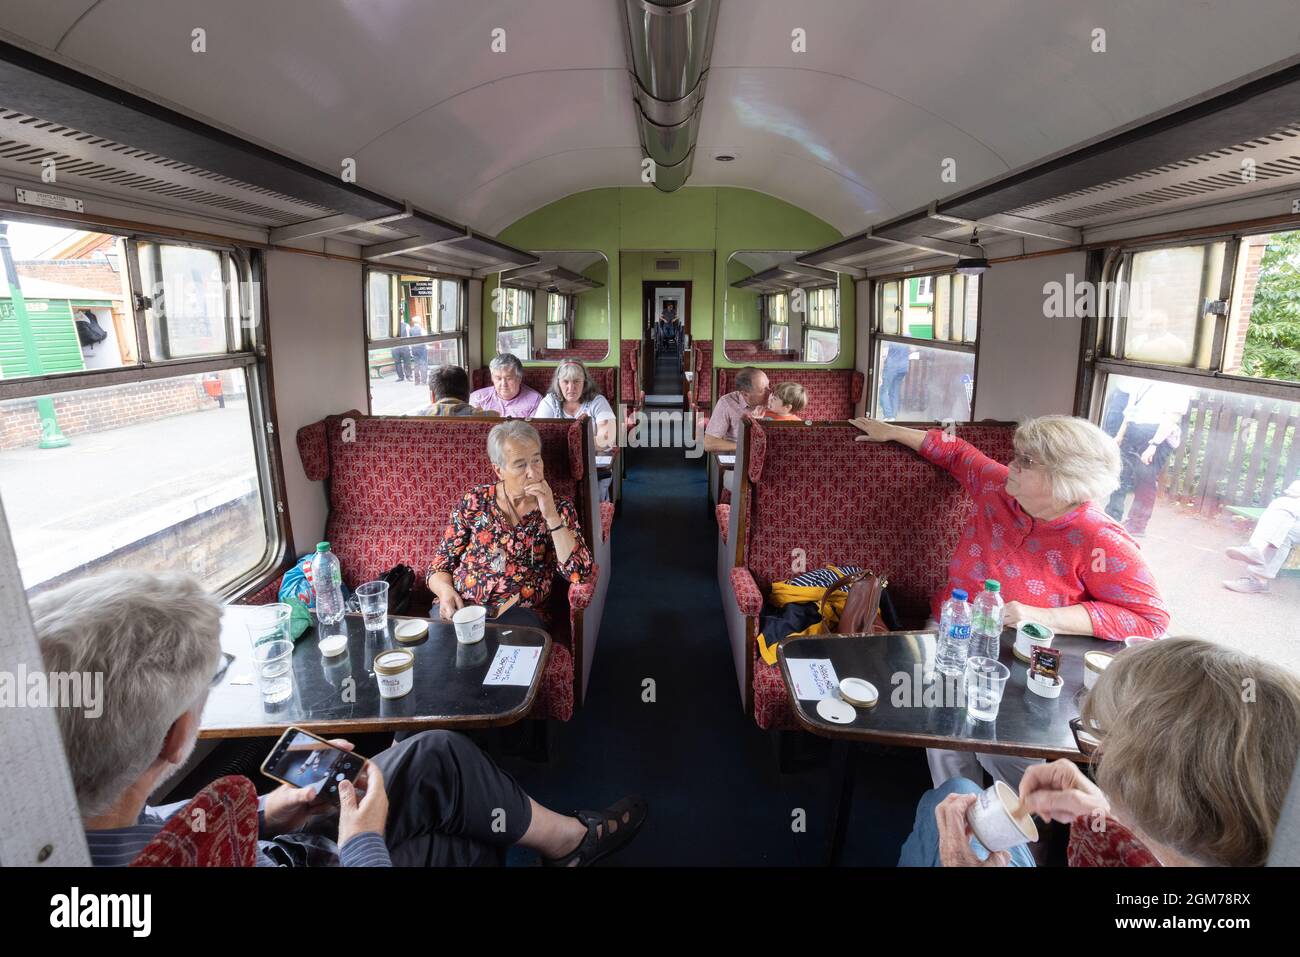 Epping Ongar Railway, a heritage railway running the Epping Fryer train; people eating and drinking in a vintage carriage on a steam train, Essex UK Stock Photo